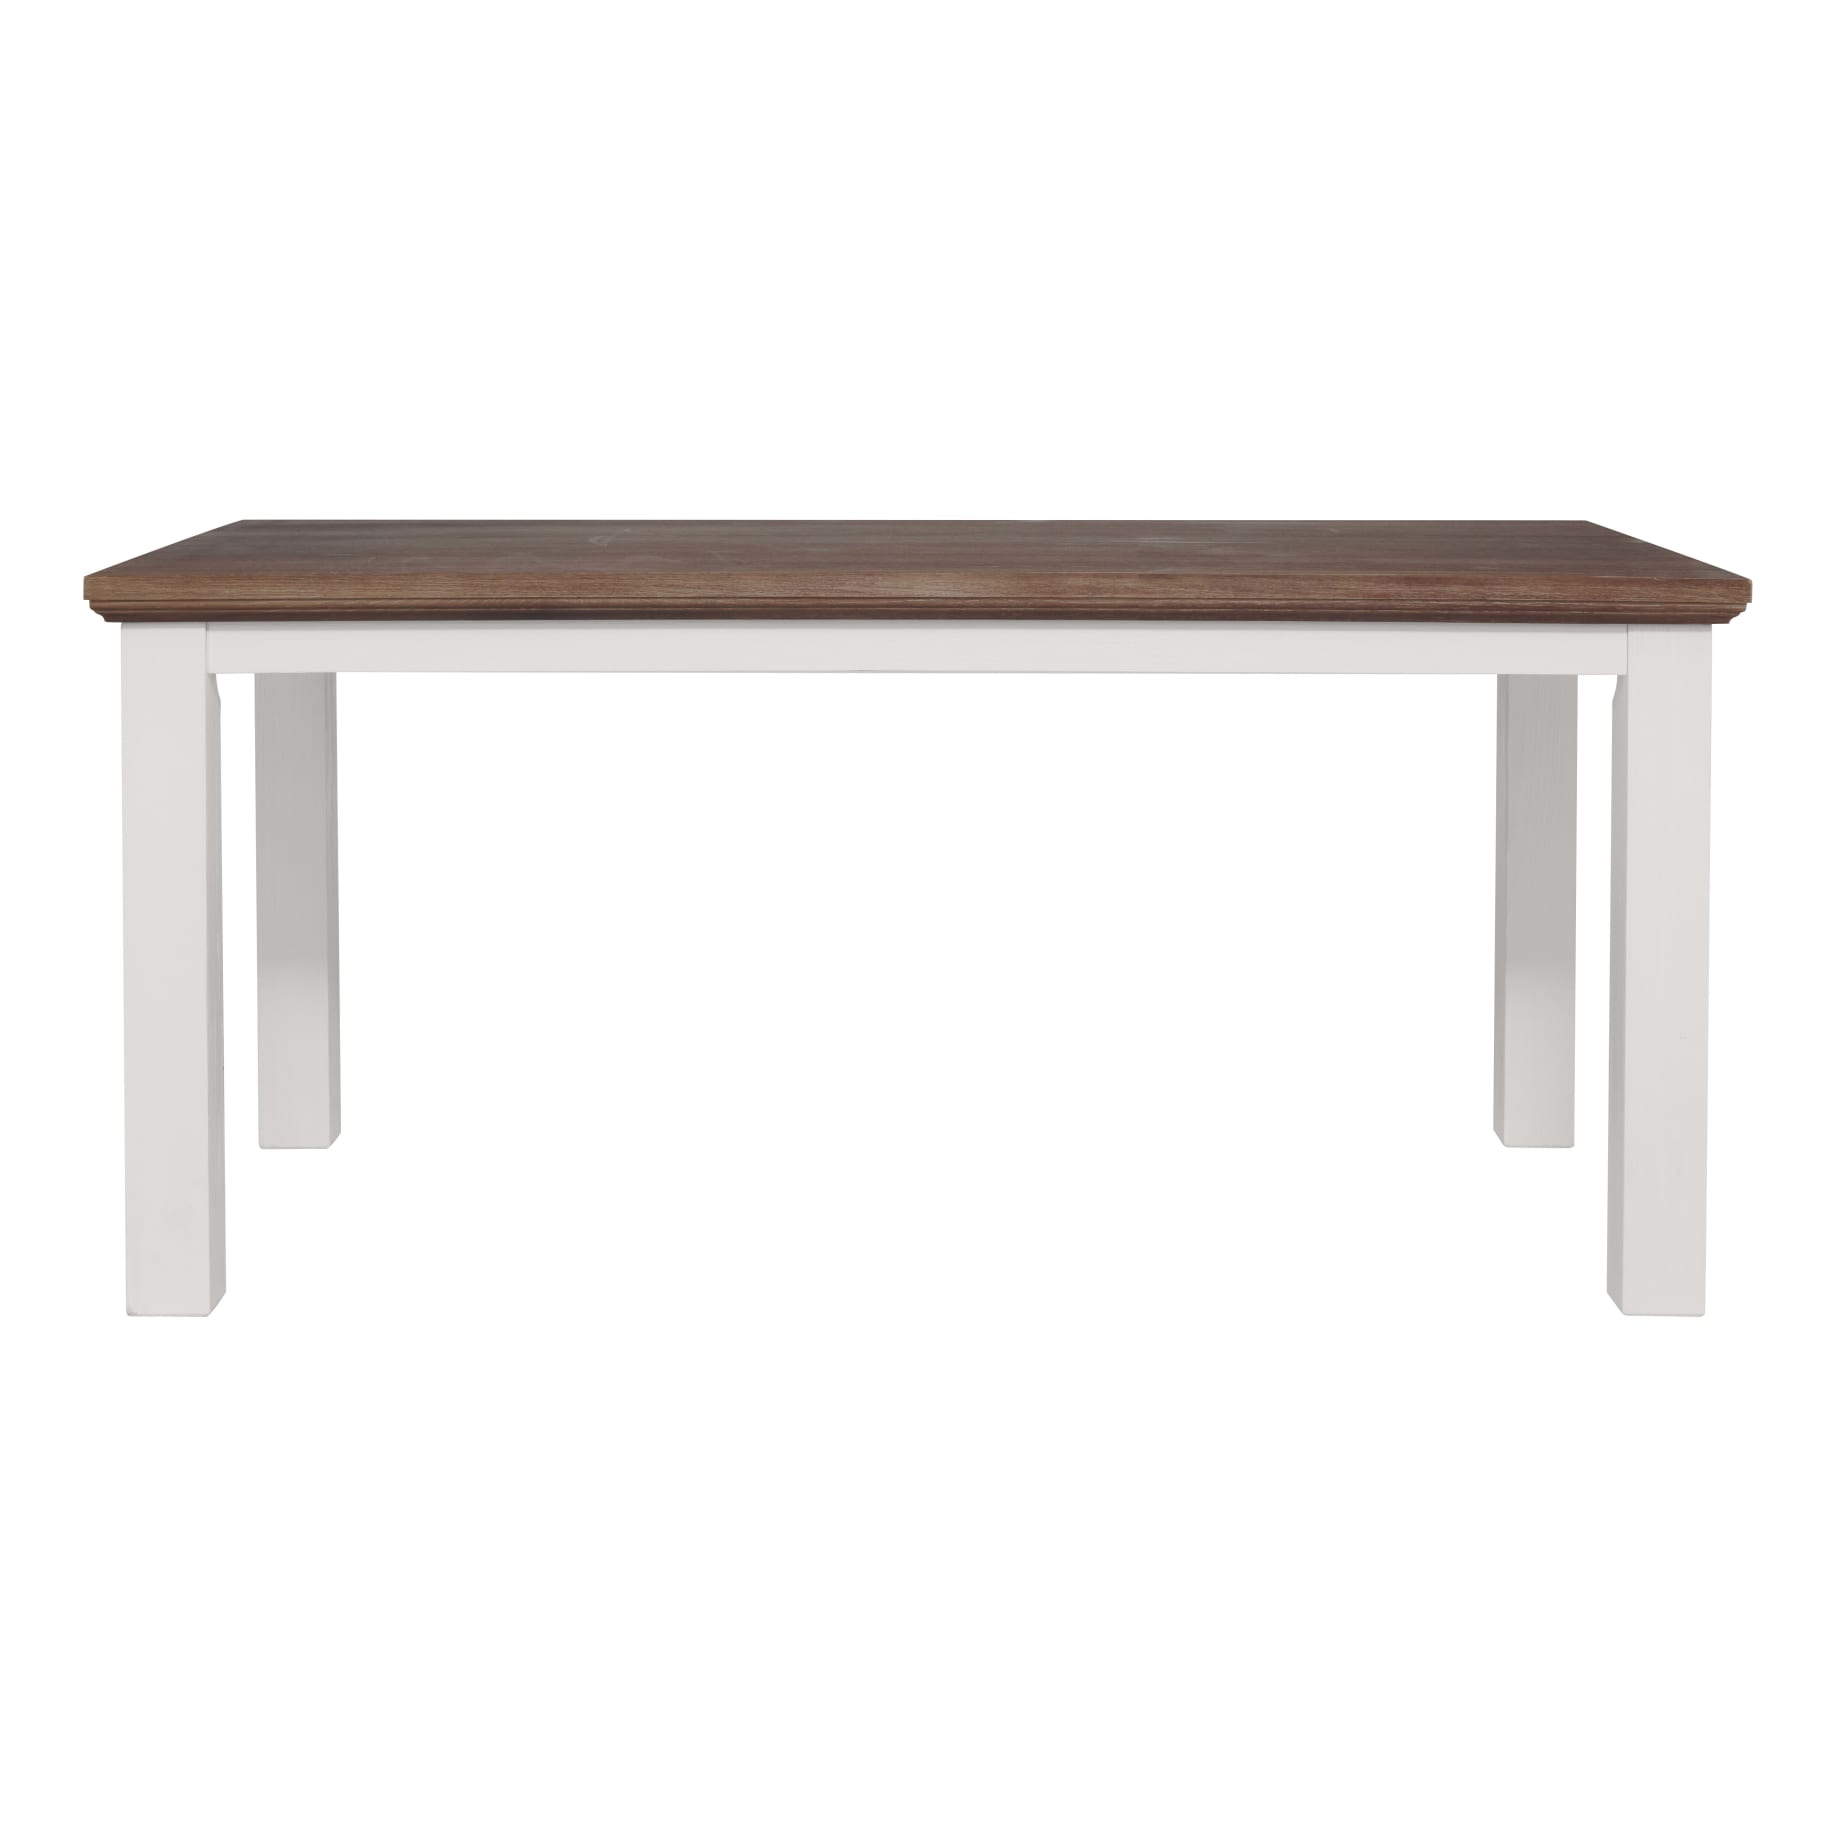 Hamptons Dining Table 180cm in Two Tone